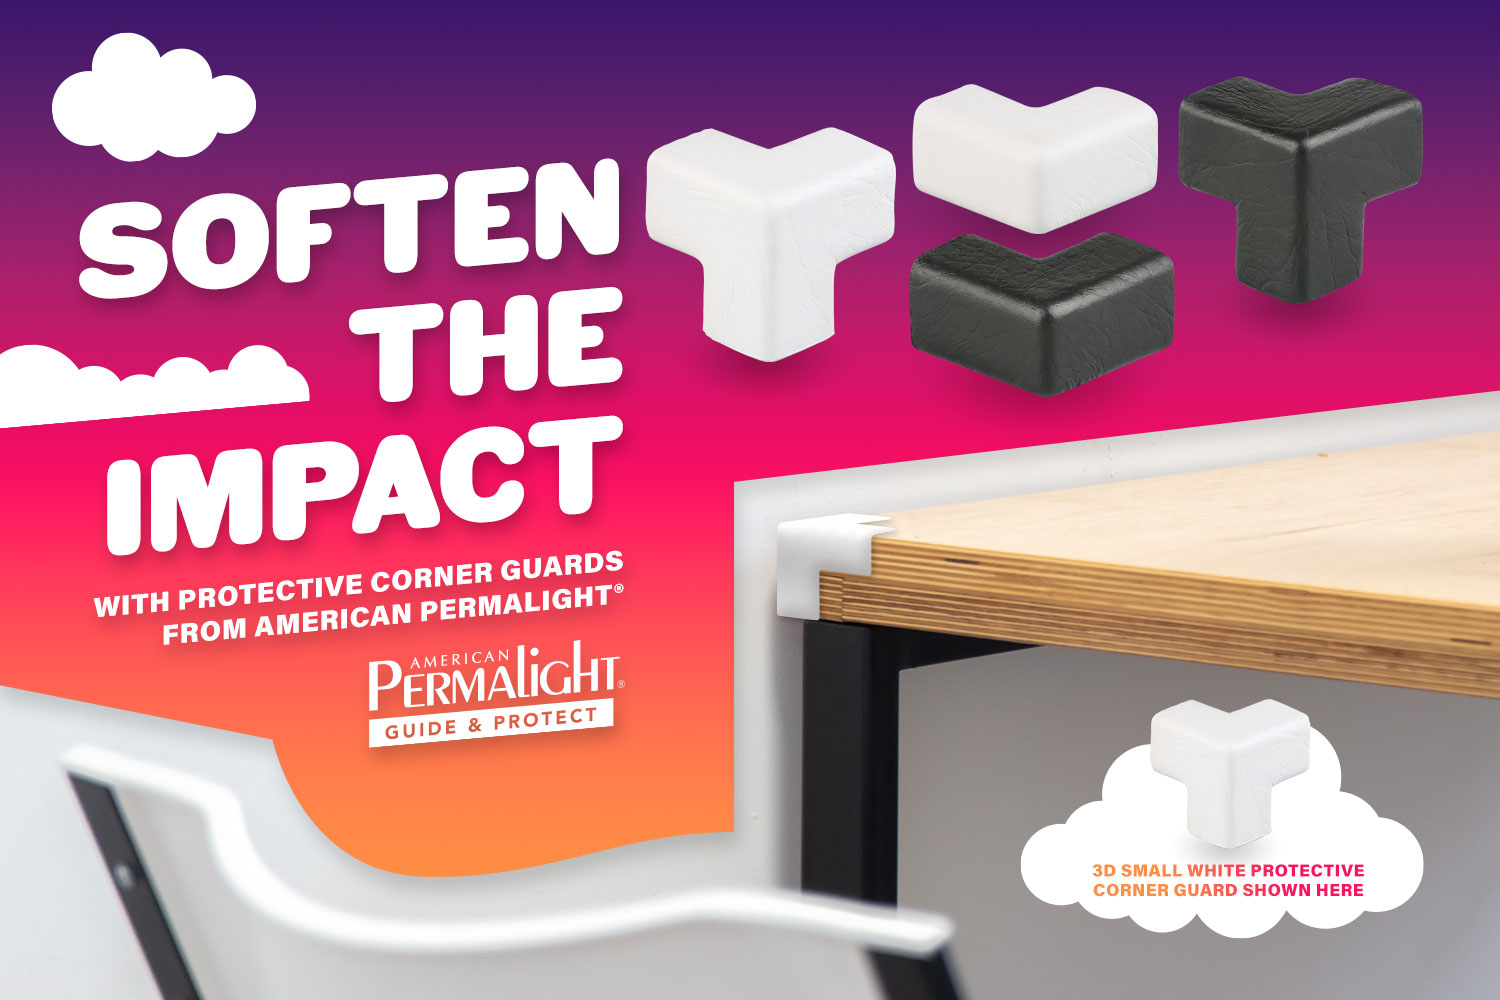 Soften the Impact with Protective Corner Guards